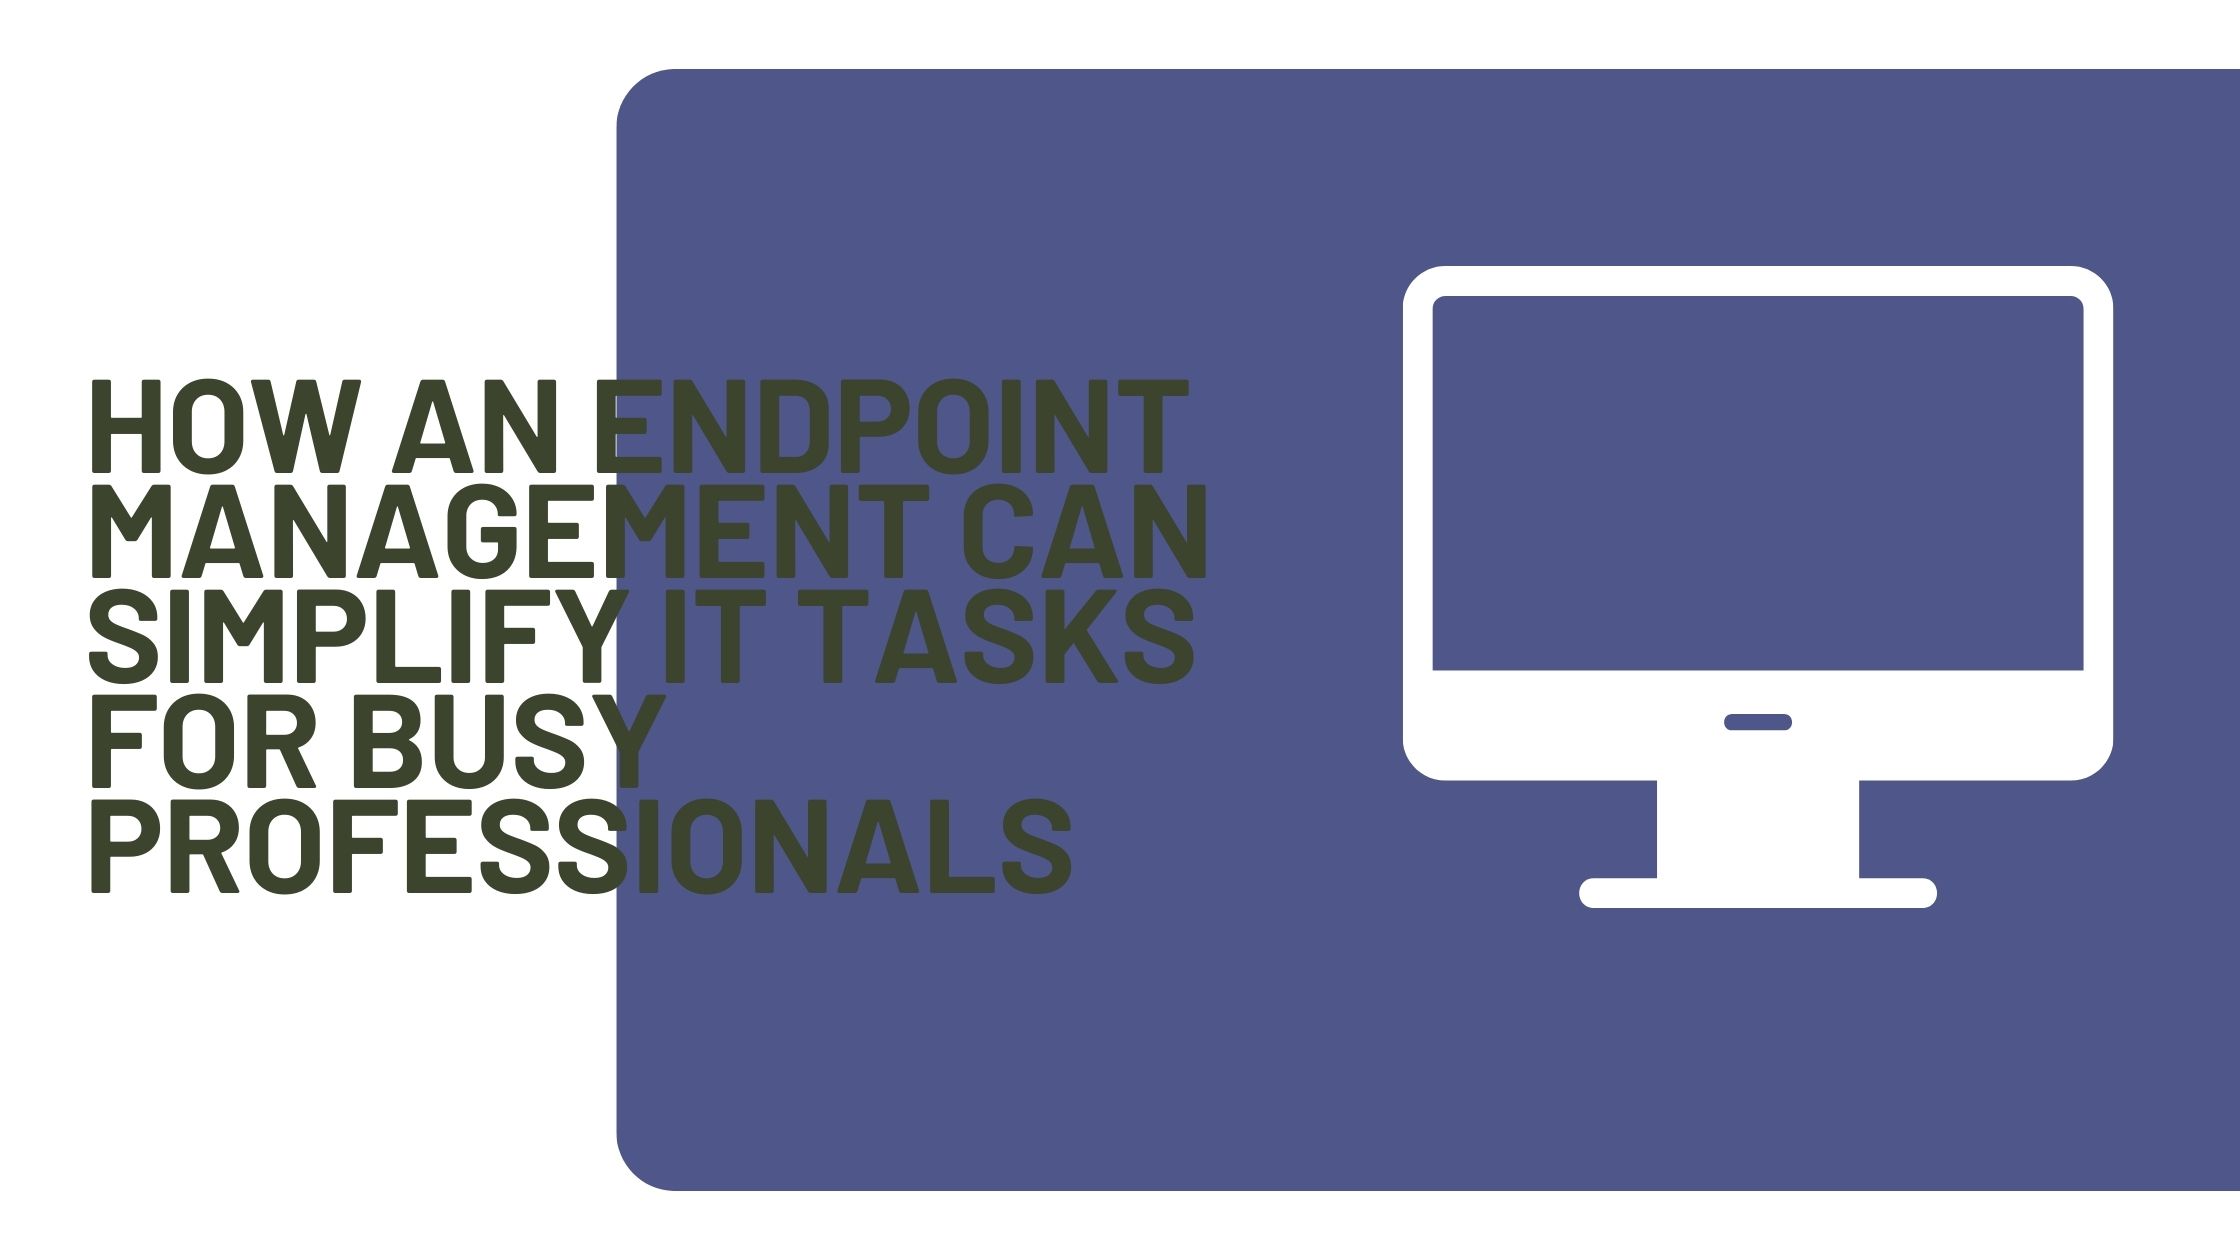 How an Endpoint Management Can Simplify IT Tasks for Busy Professionals